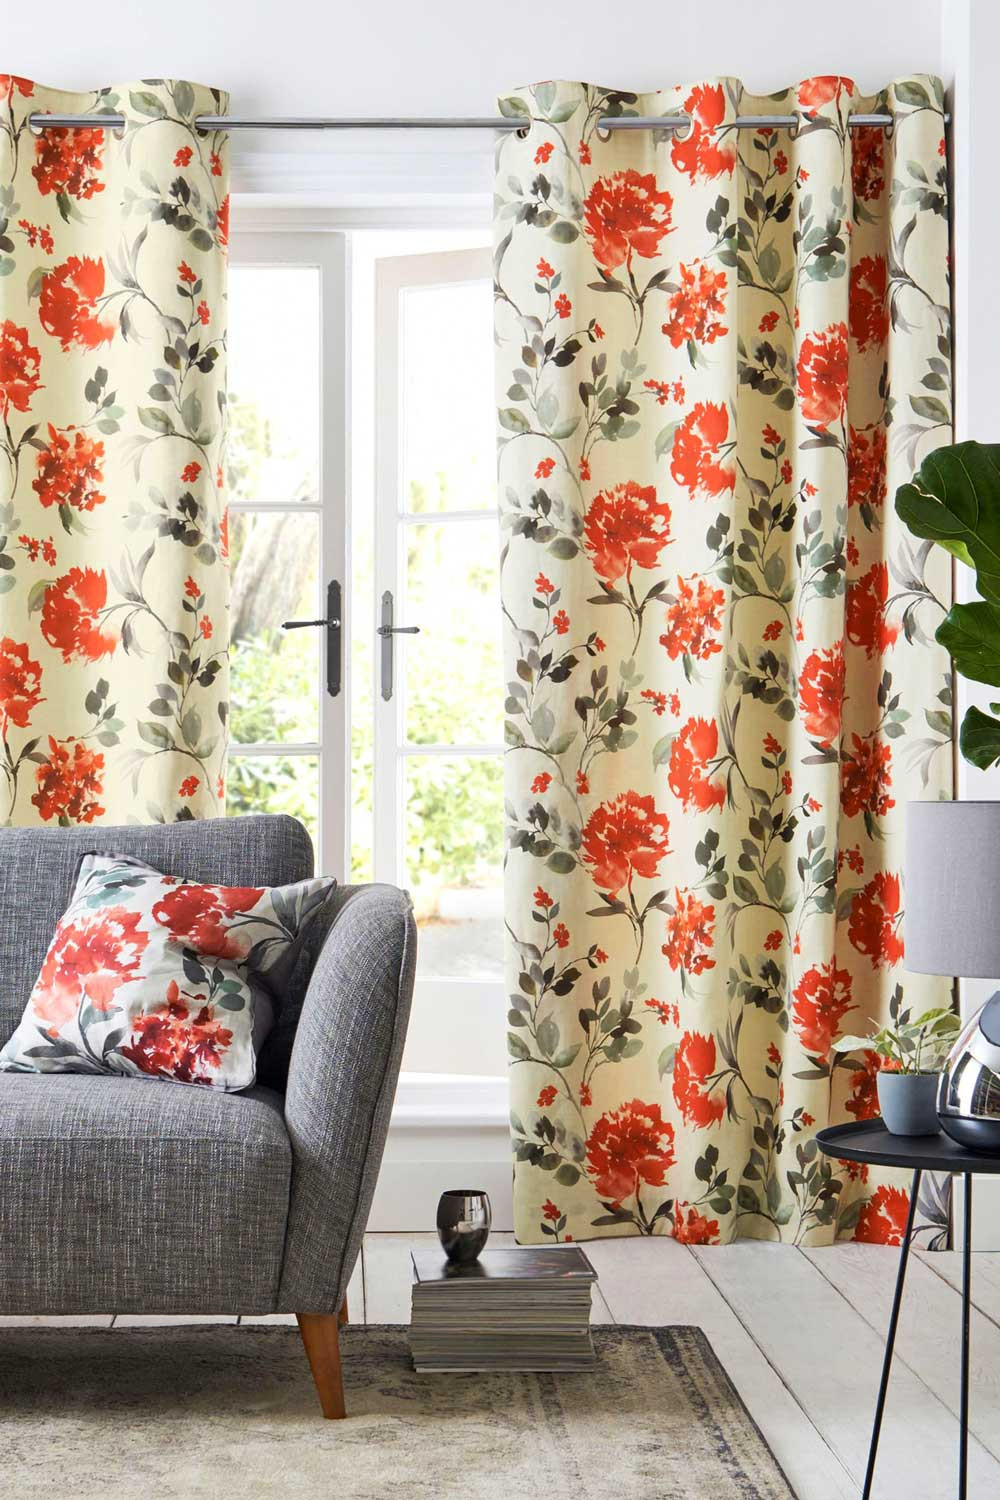 Curtain Ideas For Living Room
 30 Beautiful Living Room Curtain Ideas and Patterns